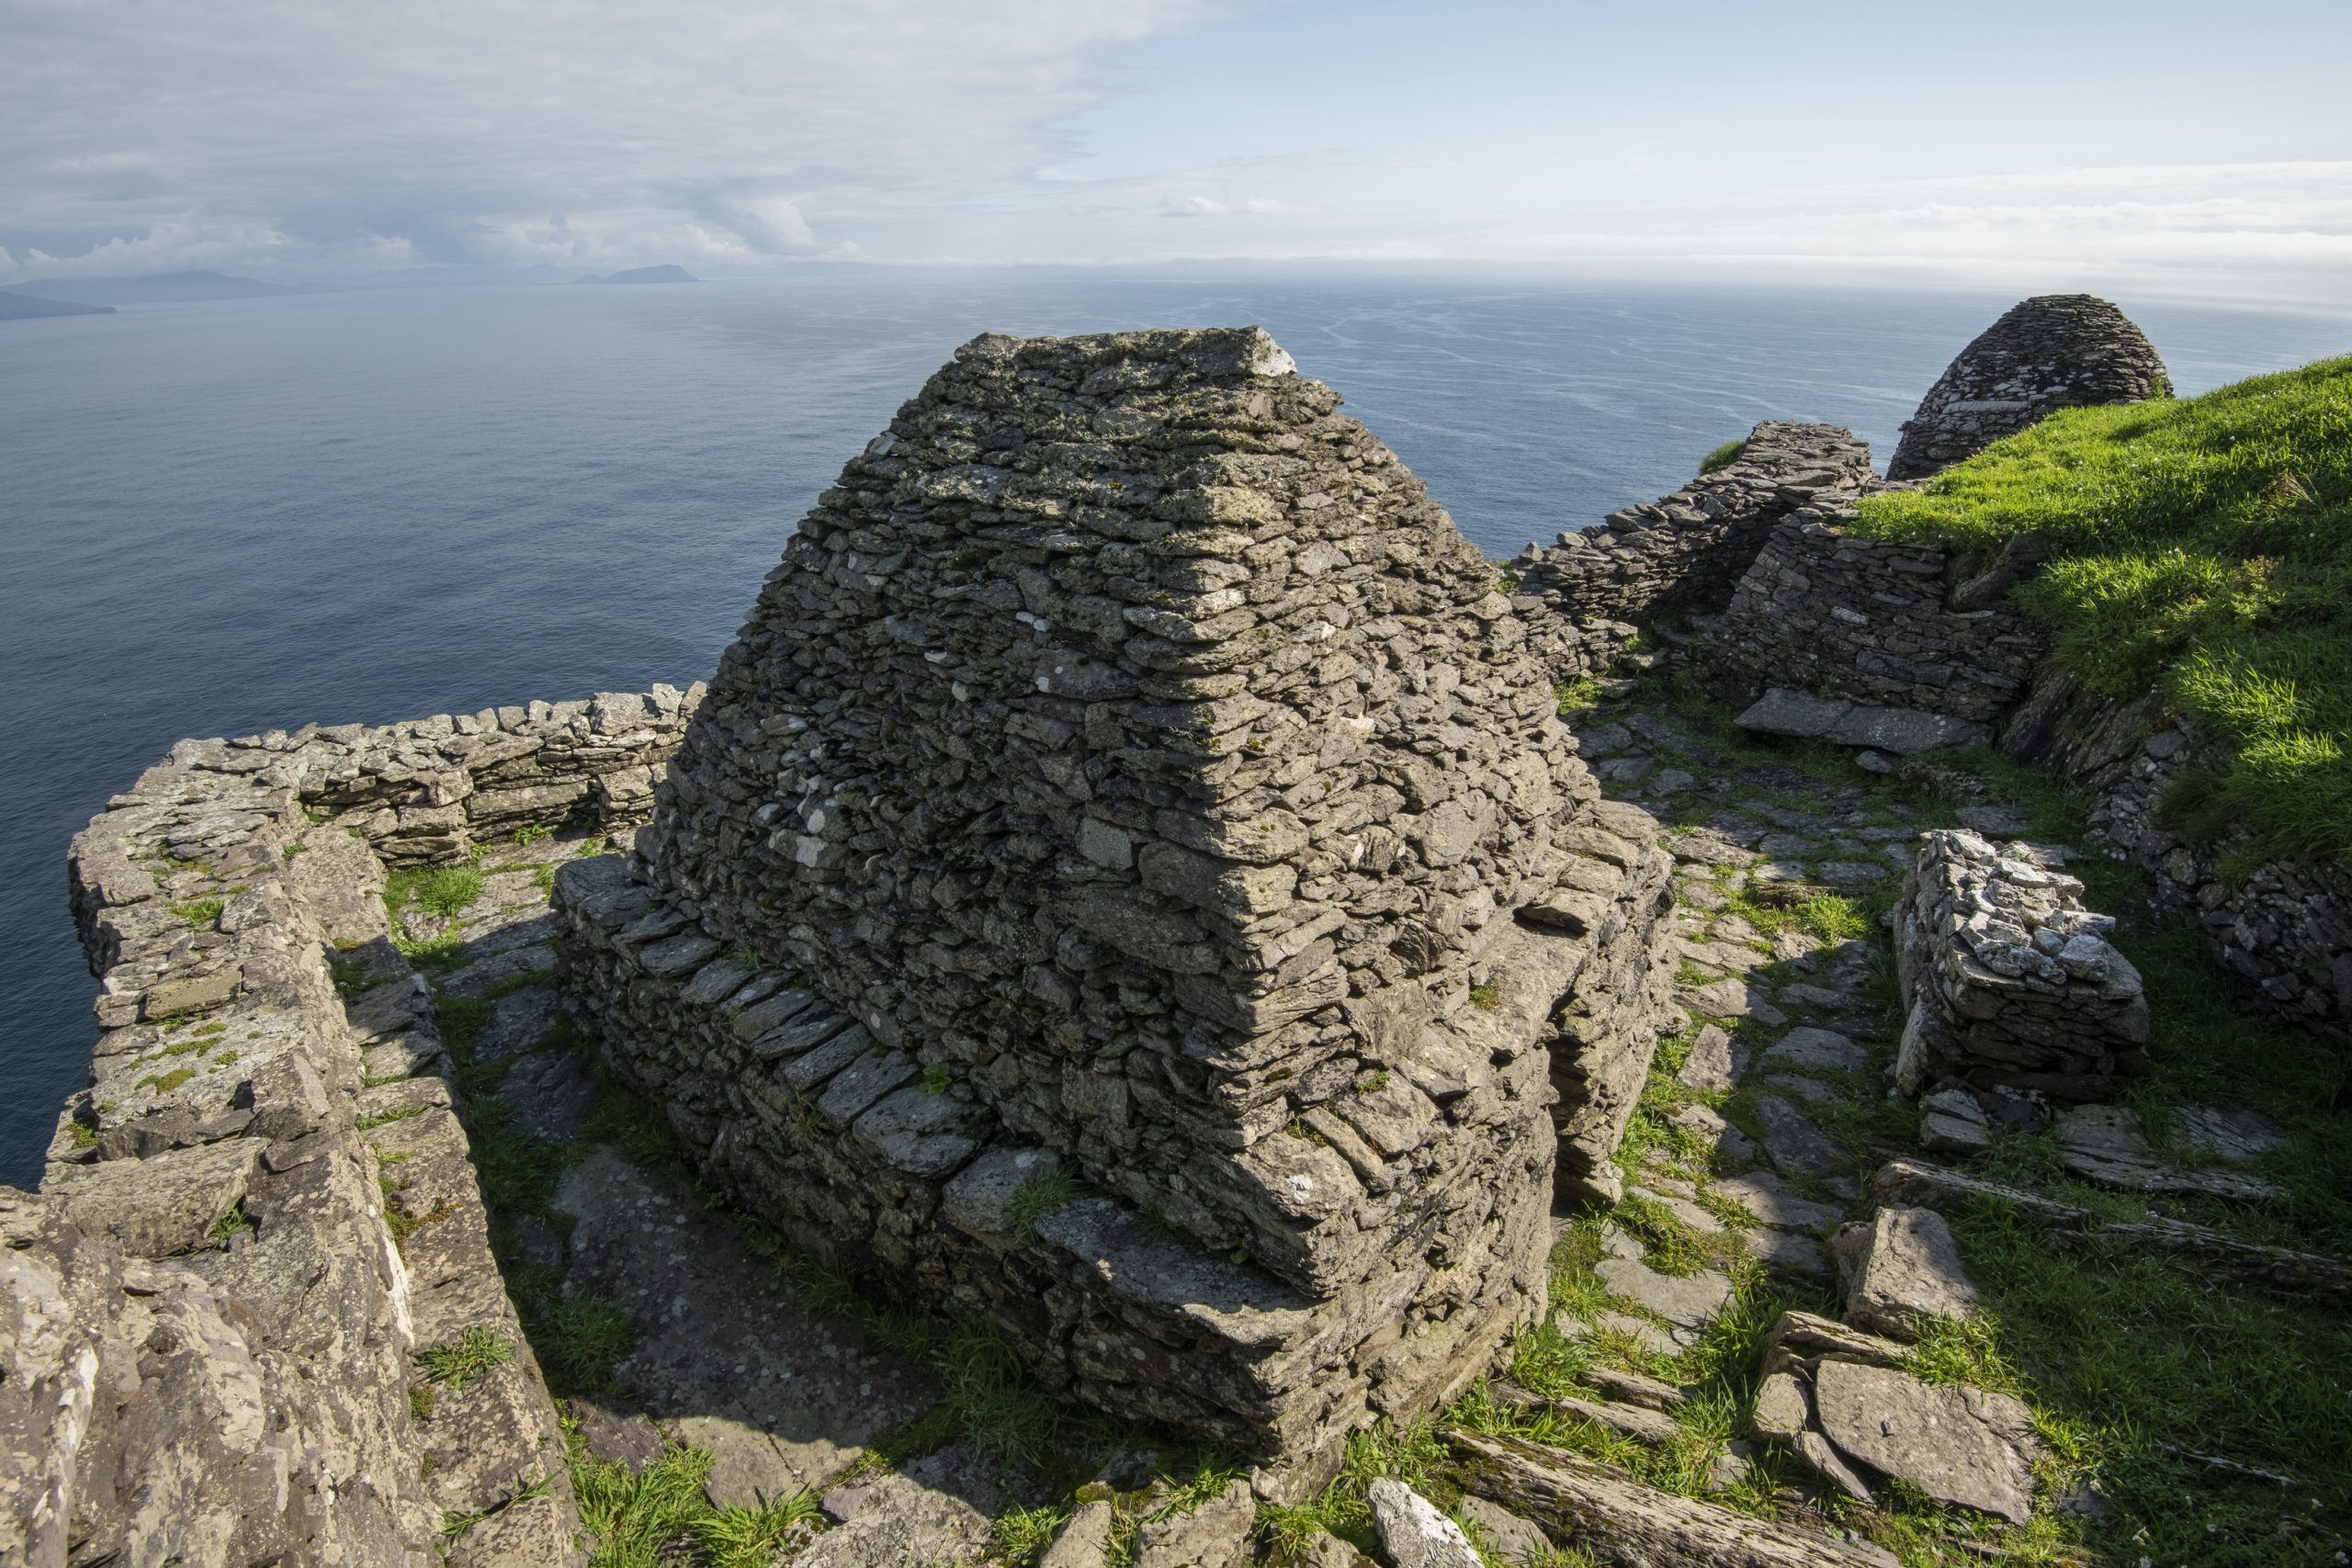 bee-hive huts in the monastery on Skellig